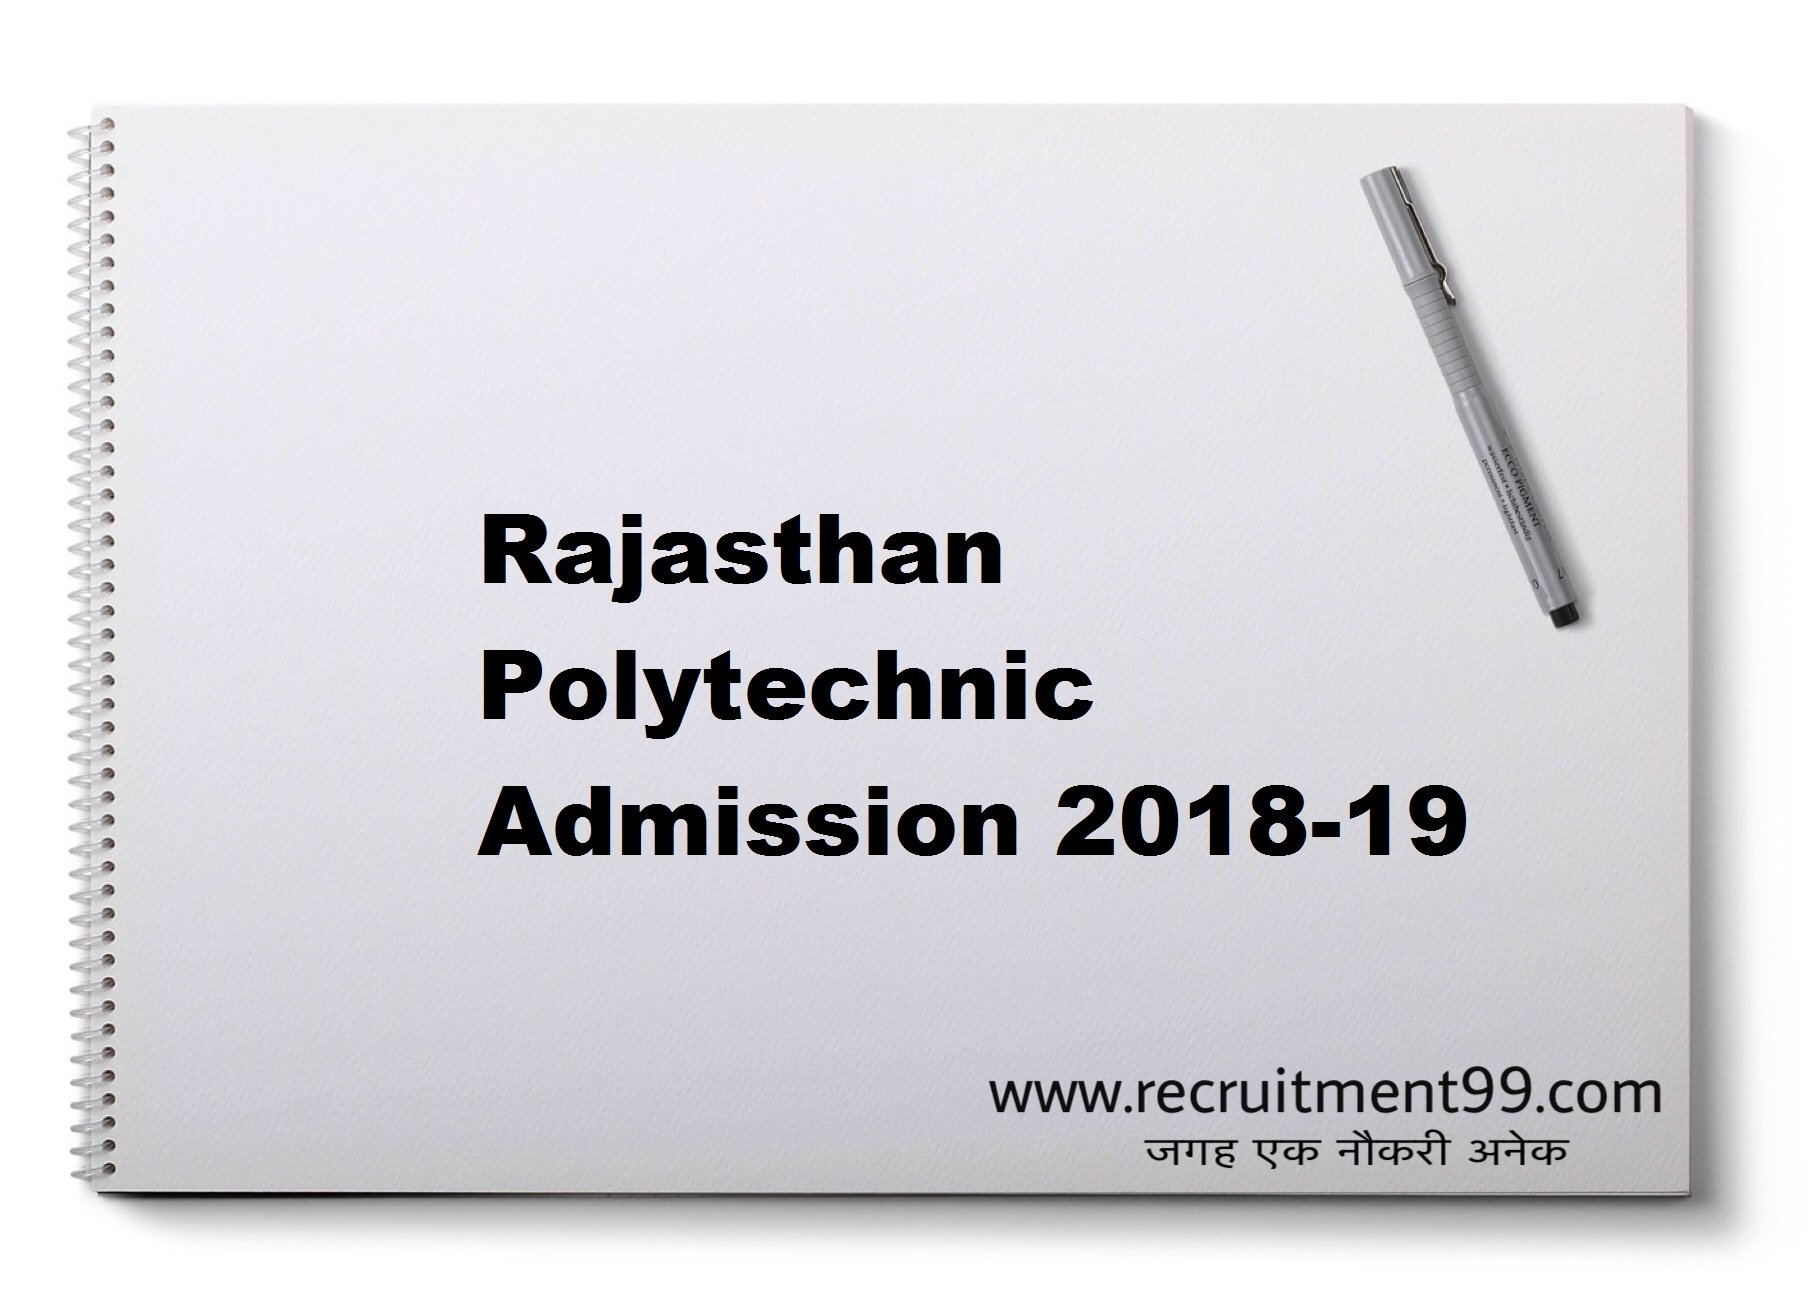 Rajasthan Polytechnic Admission Online Form Merit List Counseling 2018-19